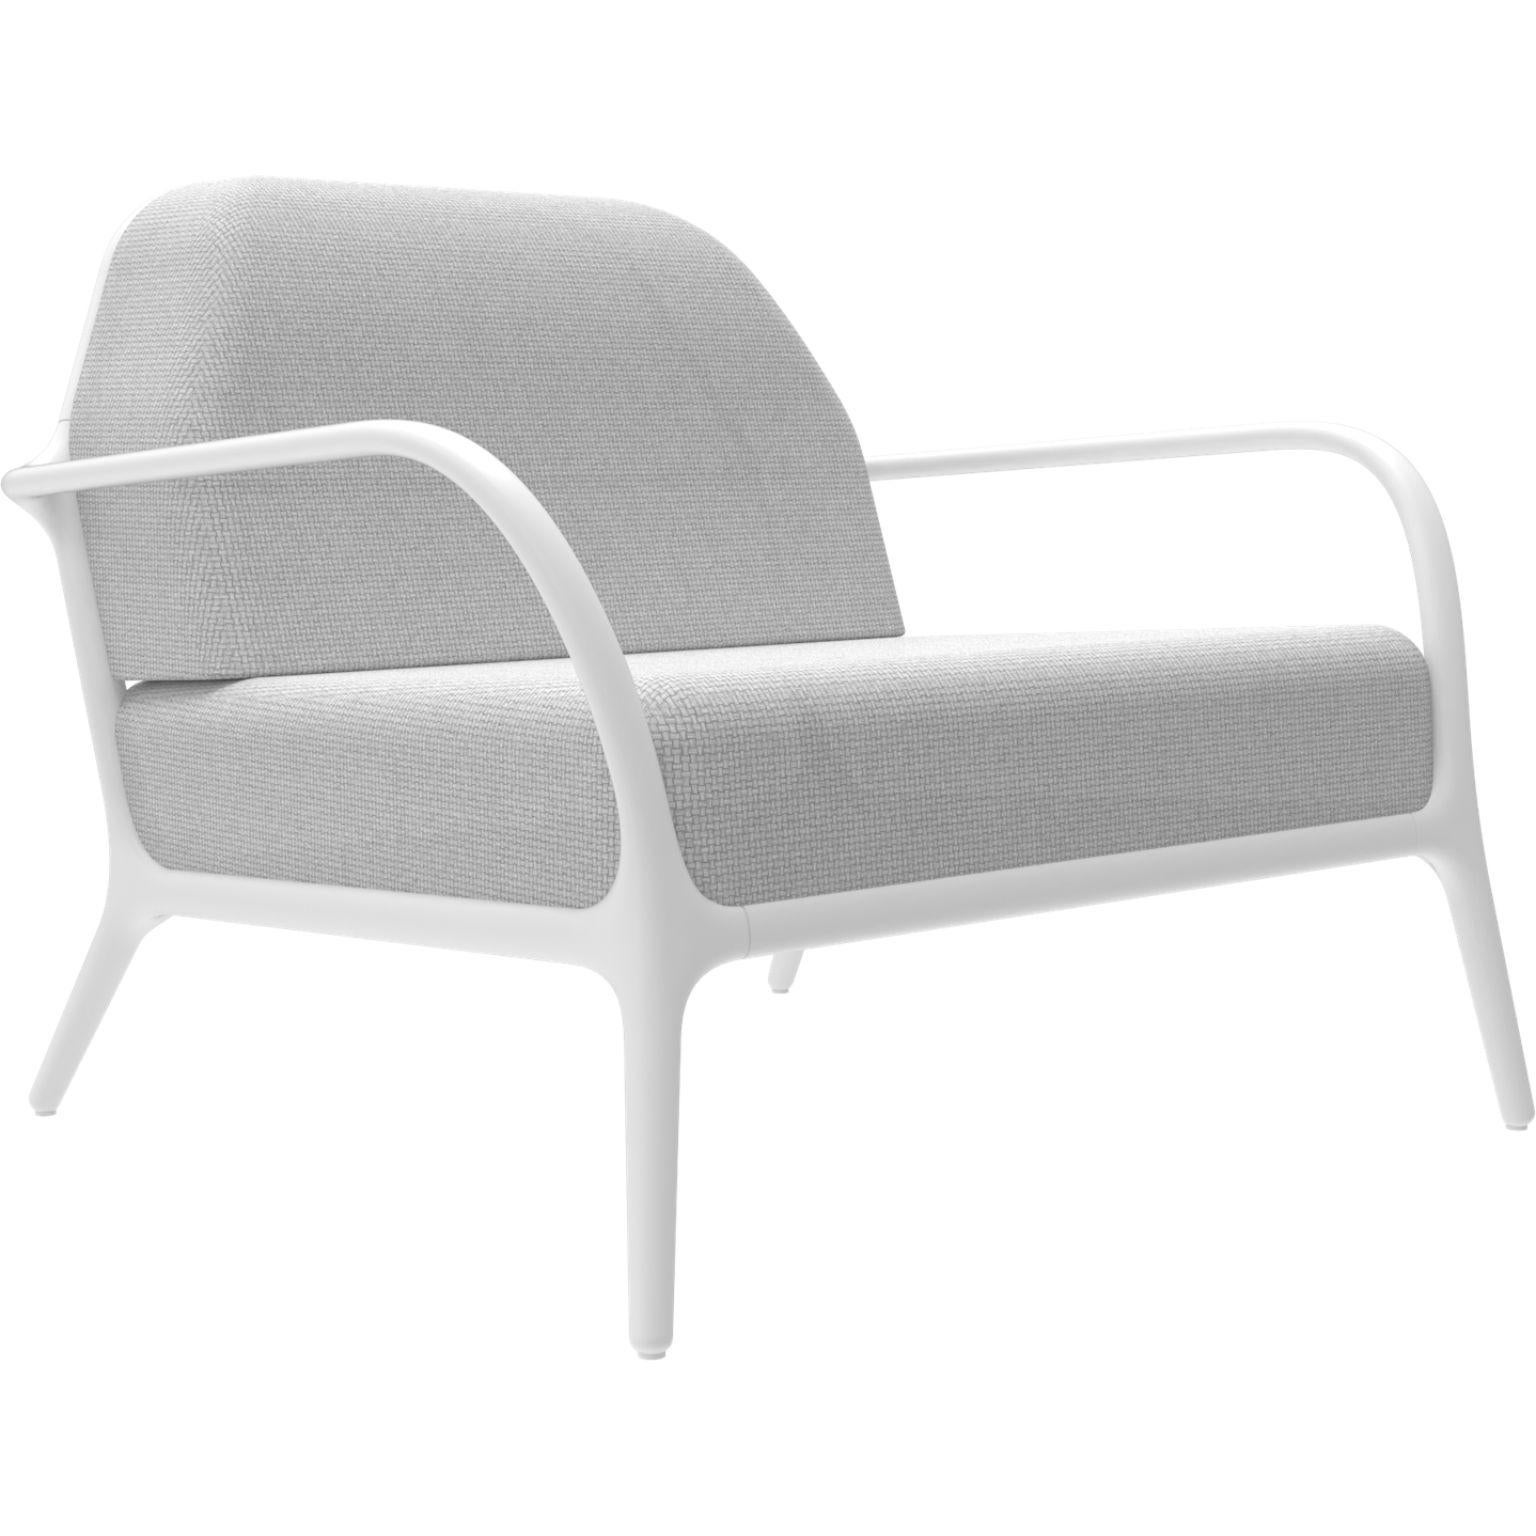 Xaloc White Amchair by MOWEE
Dimensions: D 100 x W 102 x H 81 cm (Seat Height 42 cm)
Material: Aluminum, Upholstery
Weight: 29 kg
Also available in different colours and finishes. Please contact us.

 Xaloc synthesizes the lines of interior